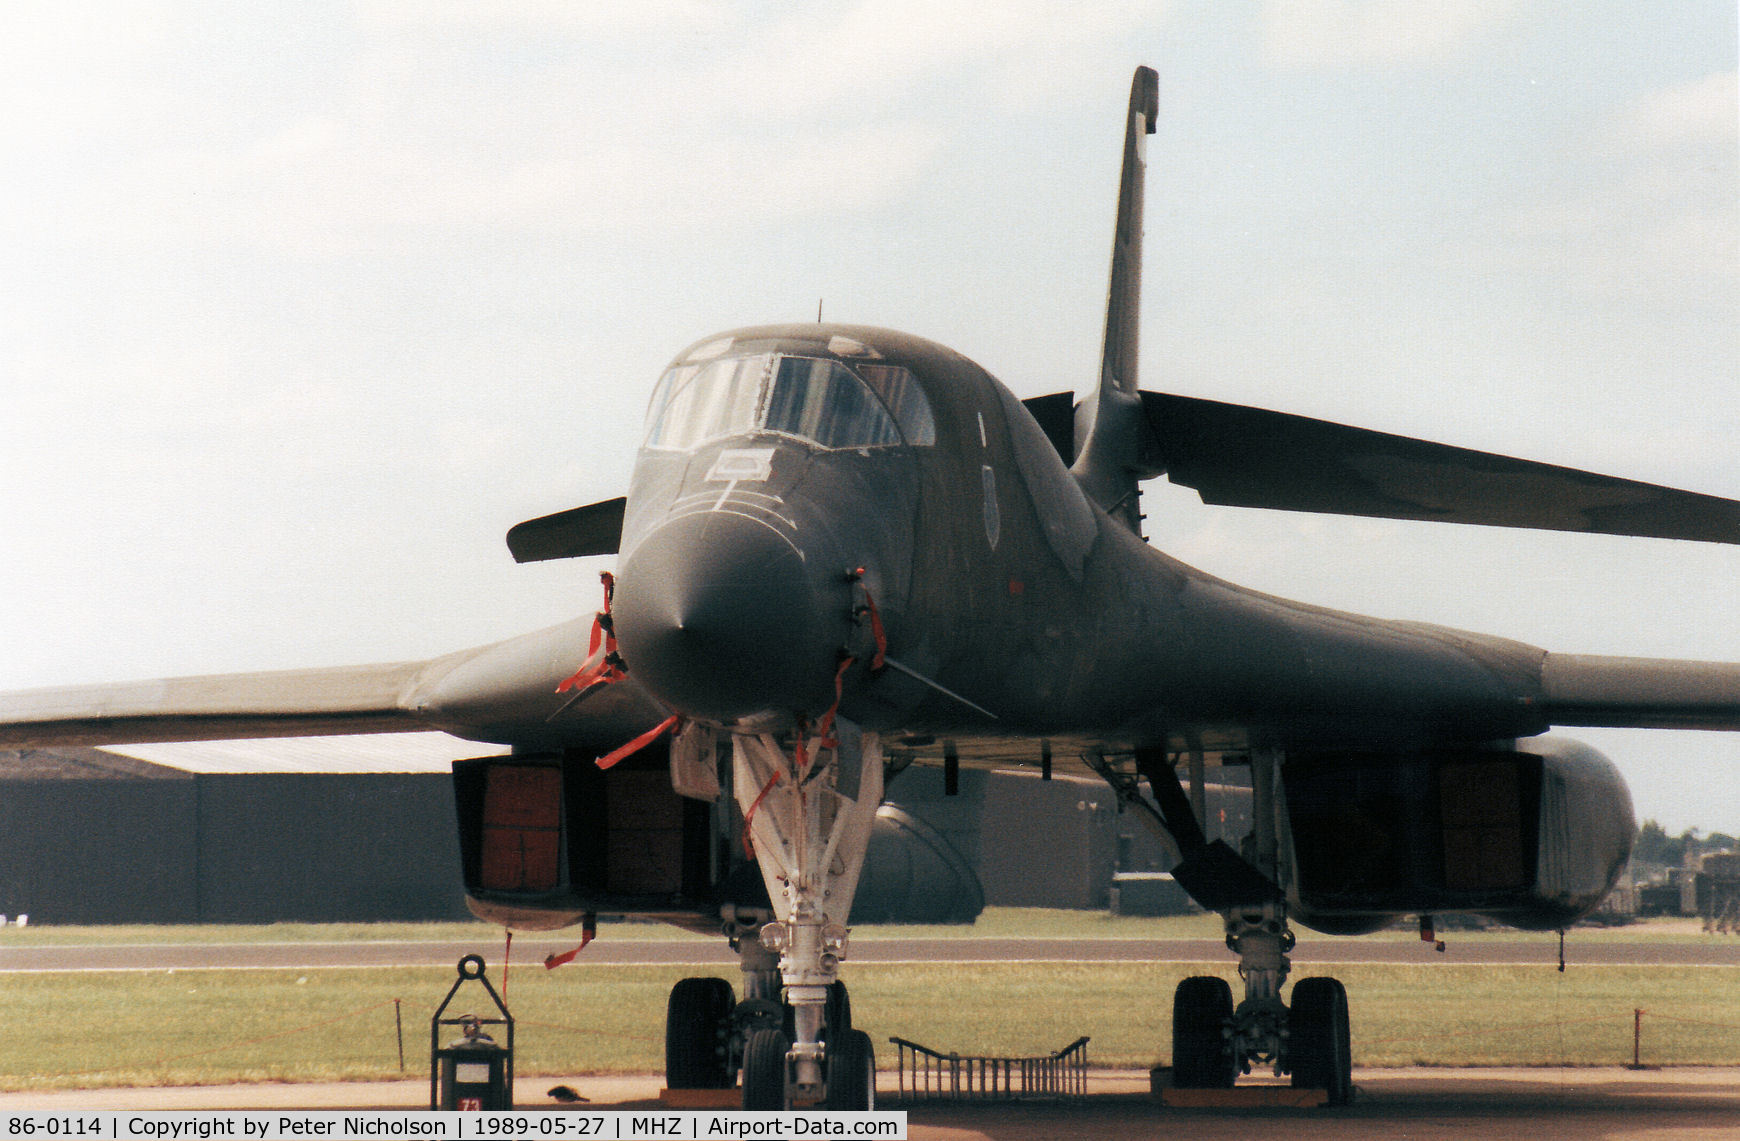 86-0114, 1986 Rockwell B-1B Lancer C/N 74, B-1B Lancer named Wolfhound and callsign Norse 13 of 319th Bombardment Wing at Grand Forks AFB on the flight-line at the 1989 RAF Mildenhall Air Fete.